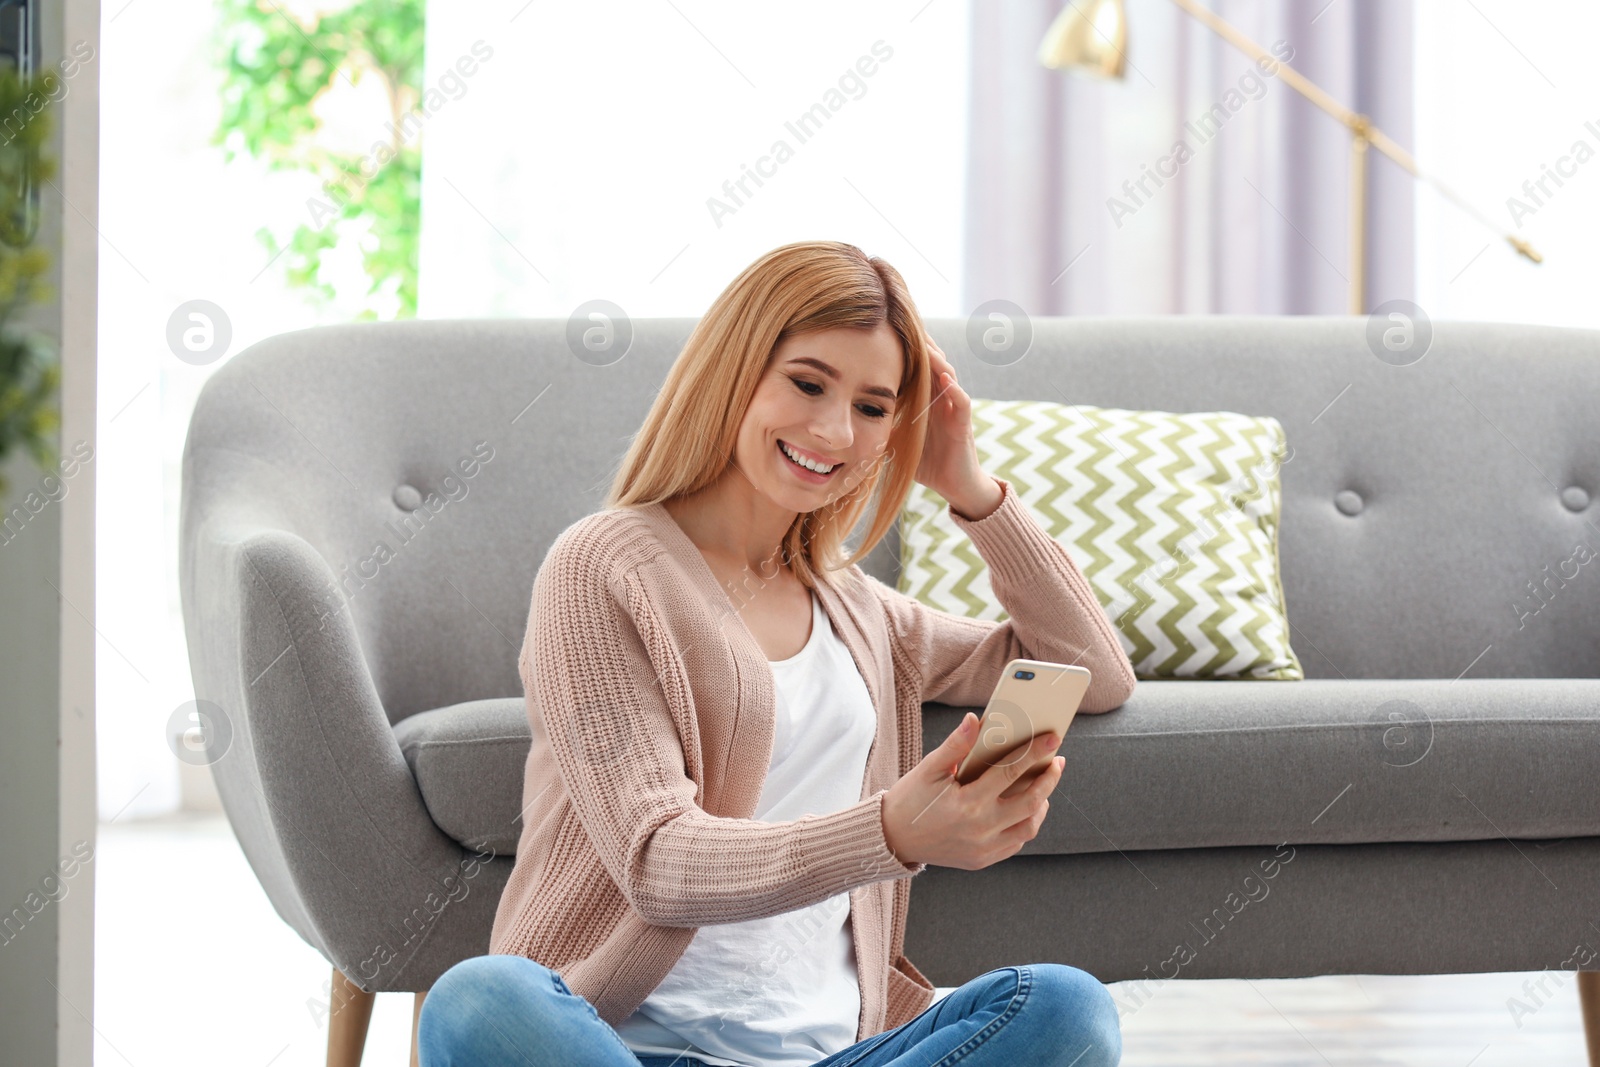 Photo of Woman using mobile phone for video chat in living room